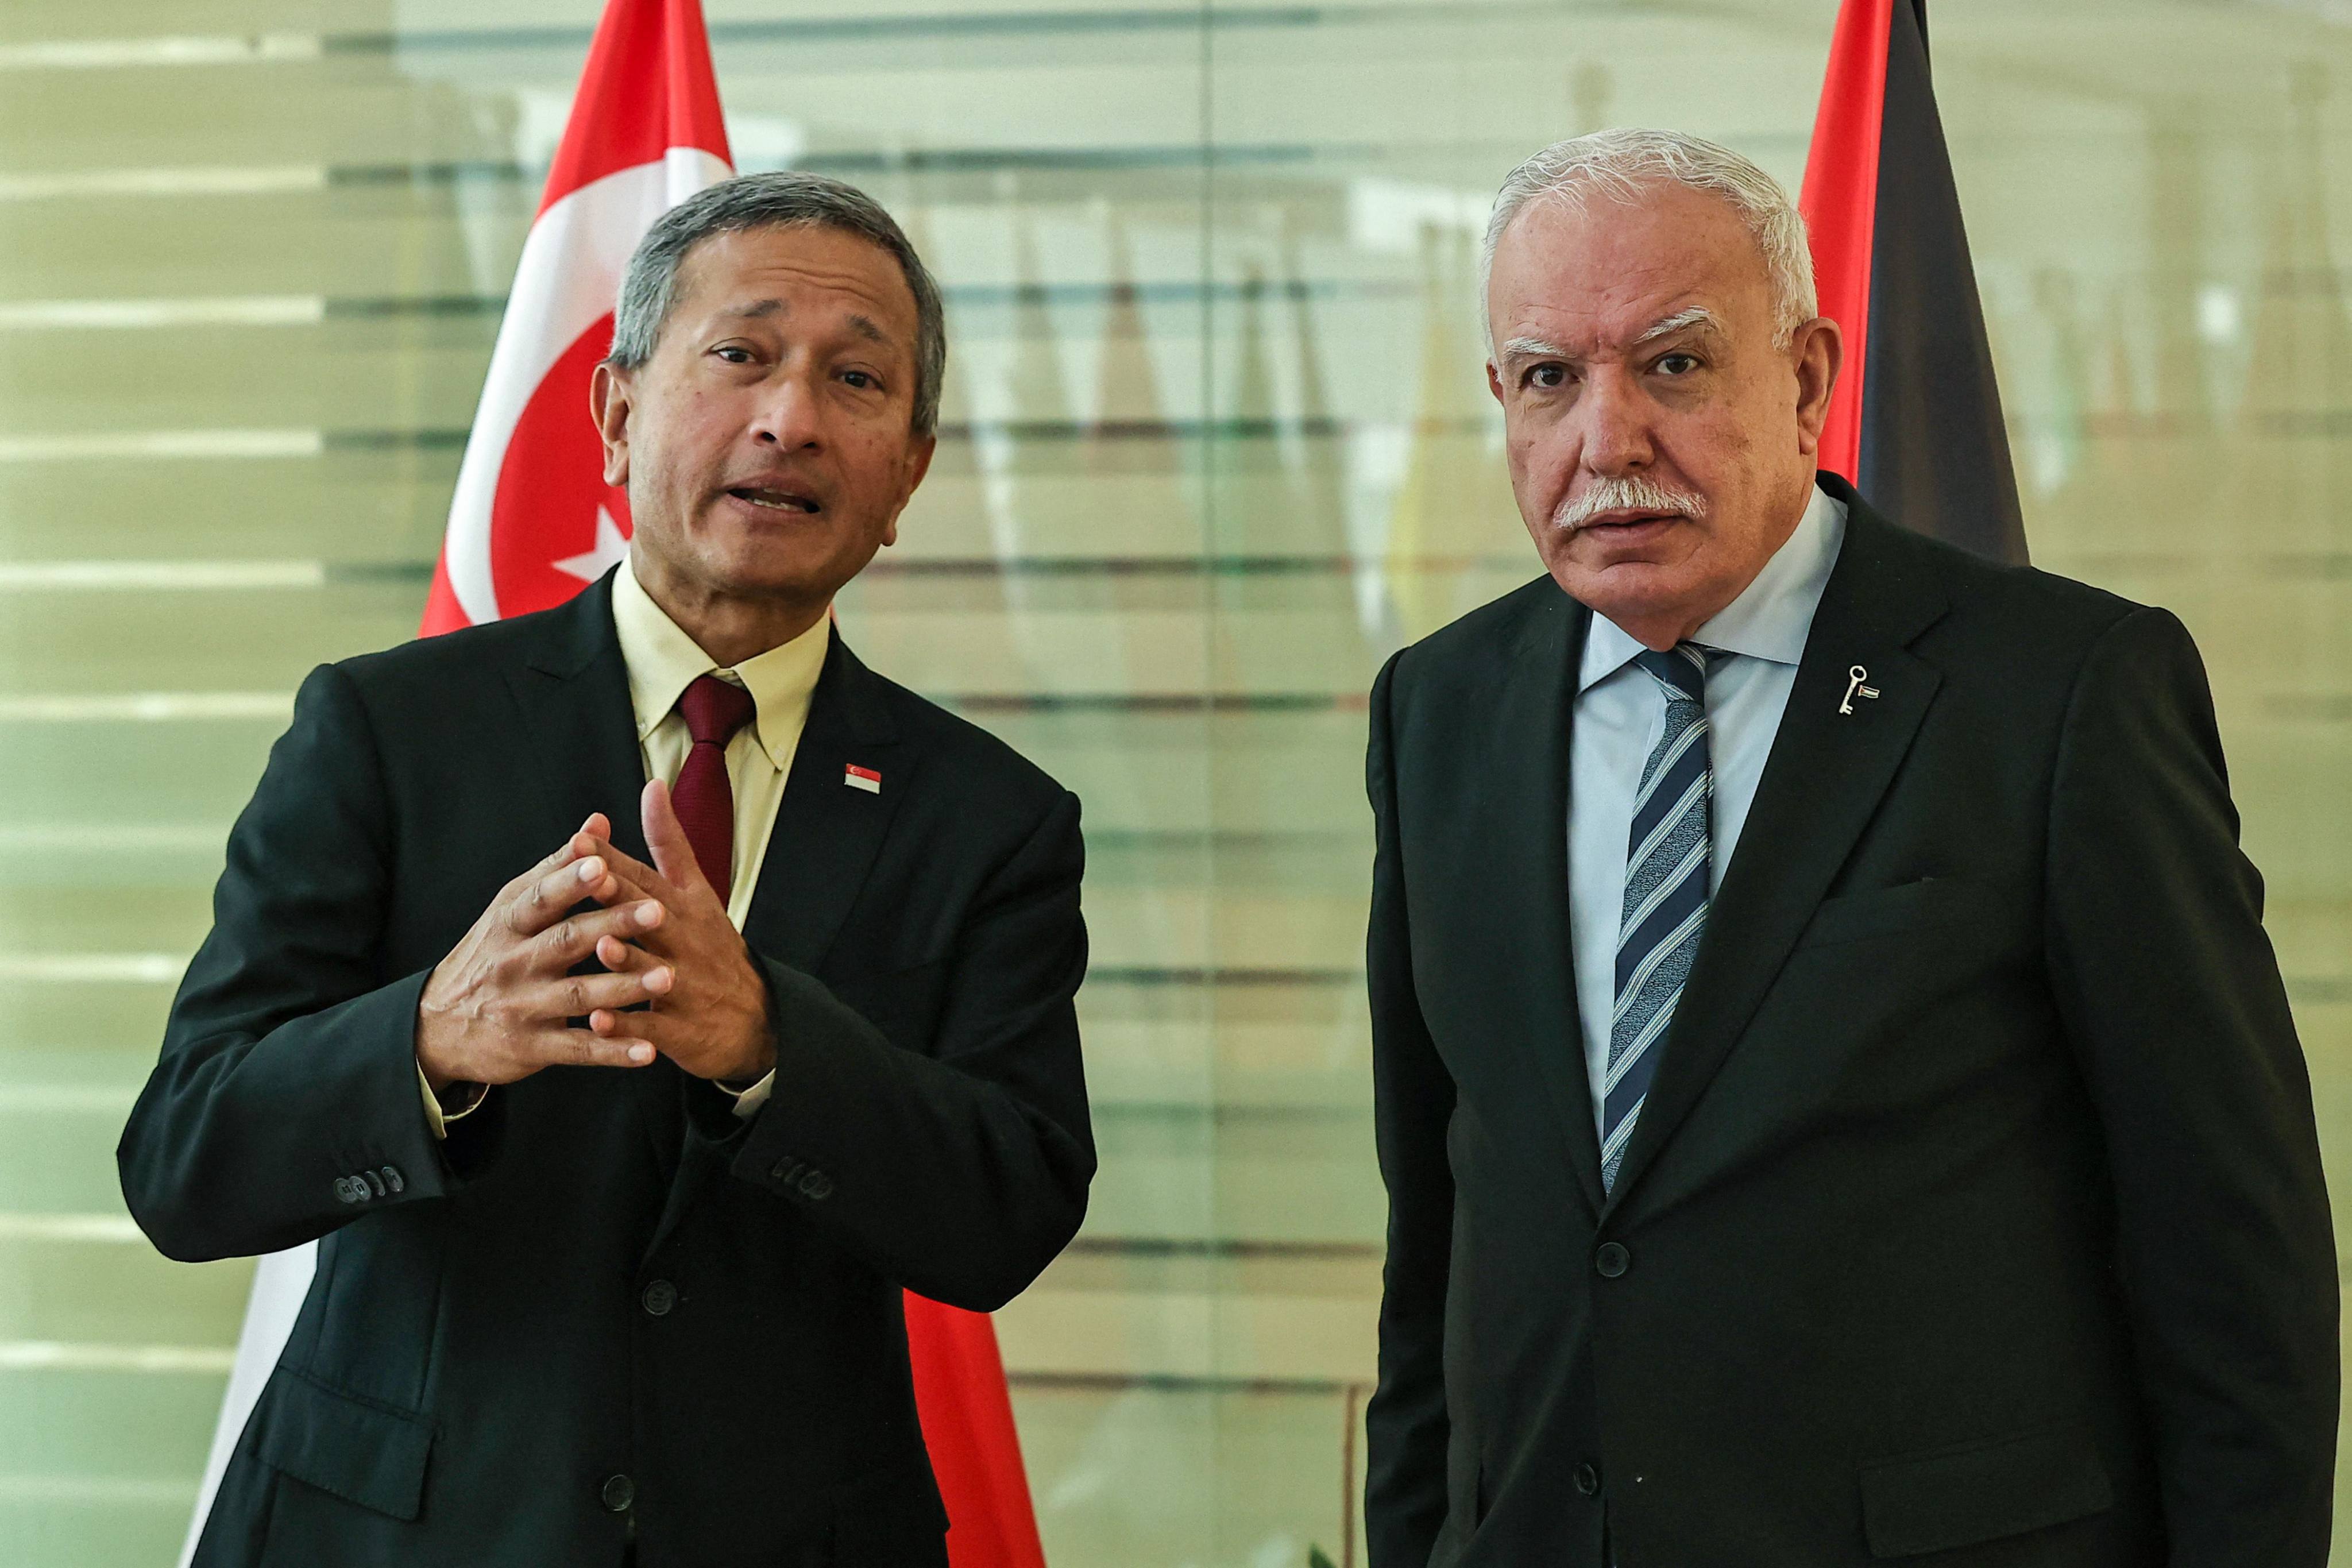 Singapore Foreign Minister Vivian Balakrishnan (left) meets his Palestinian counterpart Riyad al-Maliki in Ramallah in the occupied West Bank on March 18. Photo: AFP 